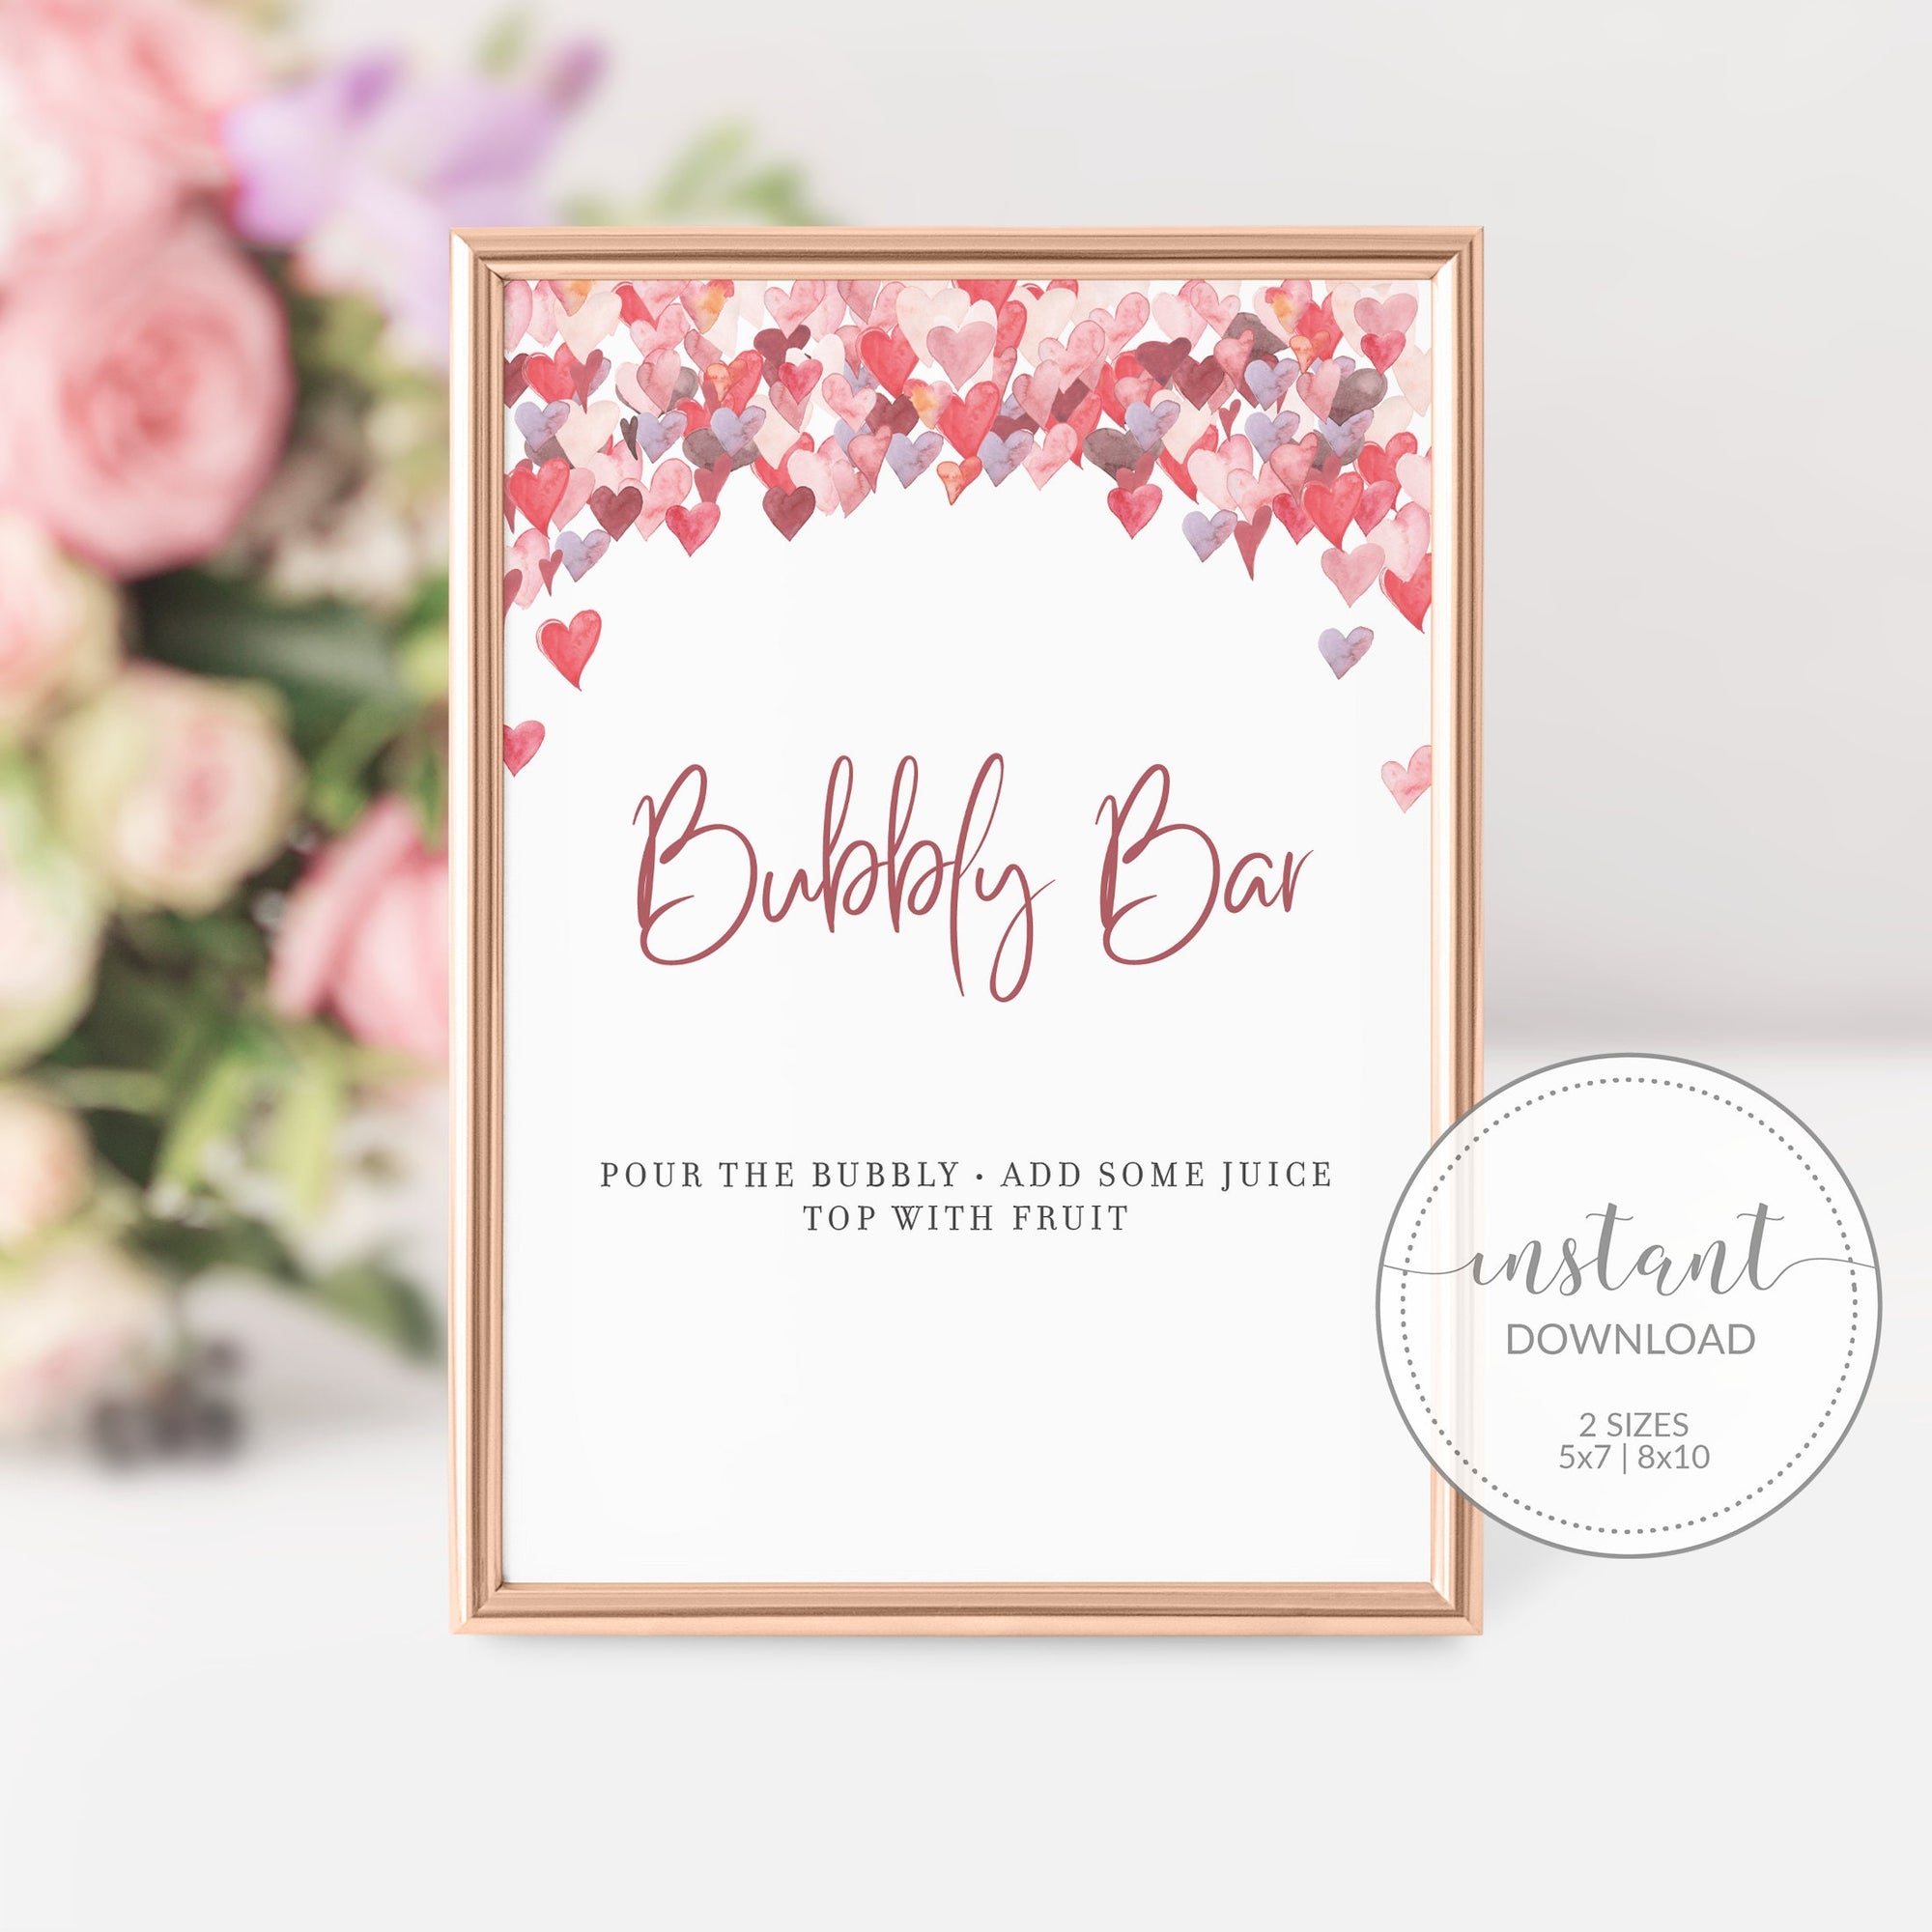 Bubbly Bar Sign Printable, Mimosa Bar Sign, Galentines Party Decorations, Valentines Wedding, Galentines Day, DIGITAL DOWNLOAD VH100